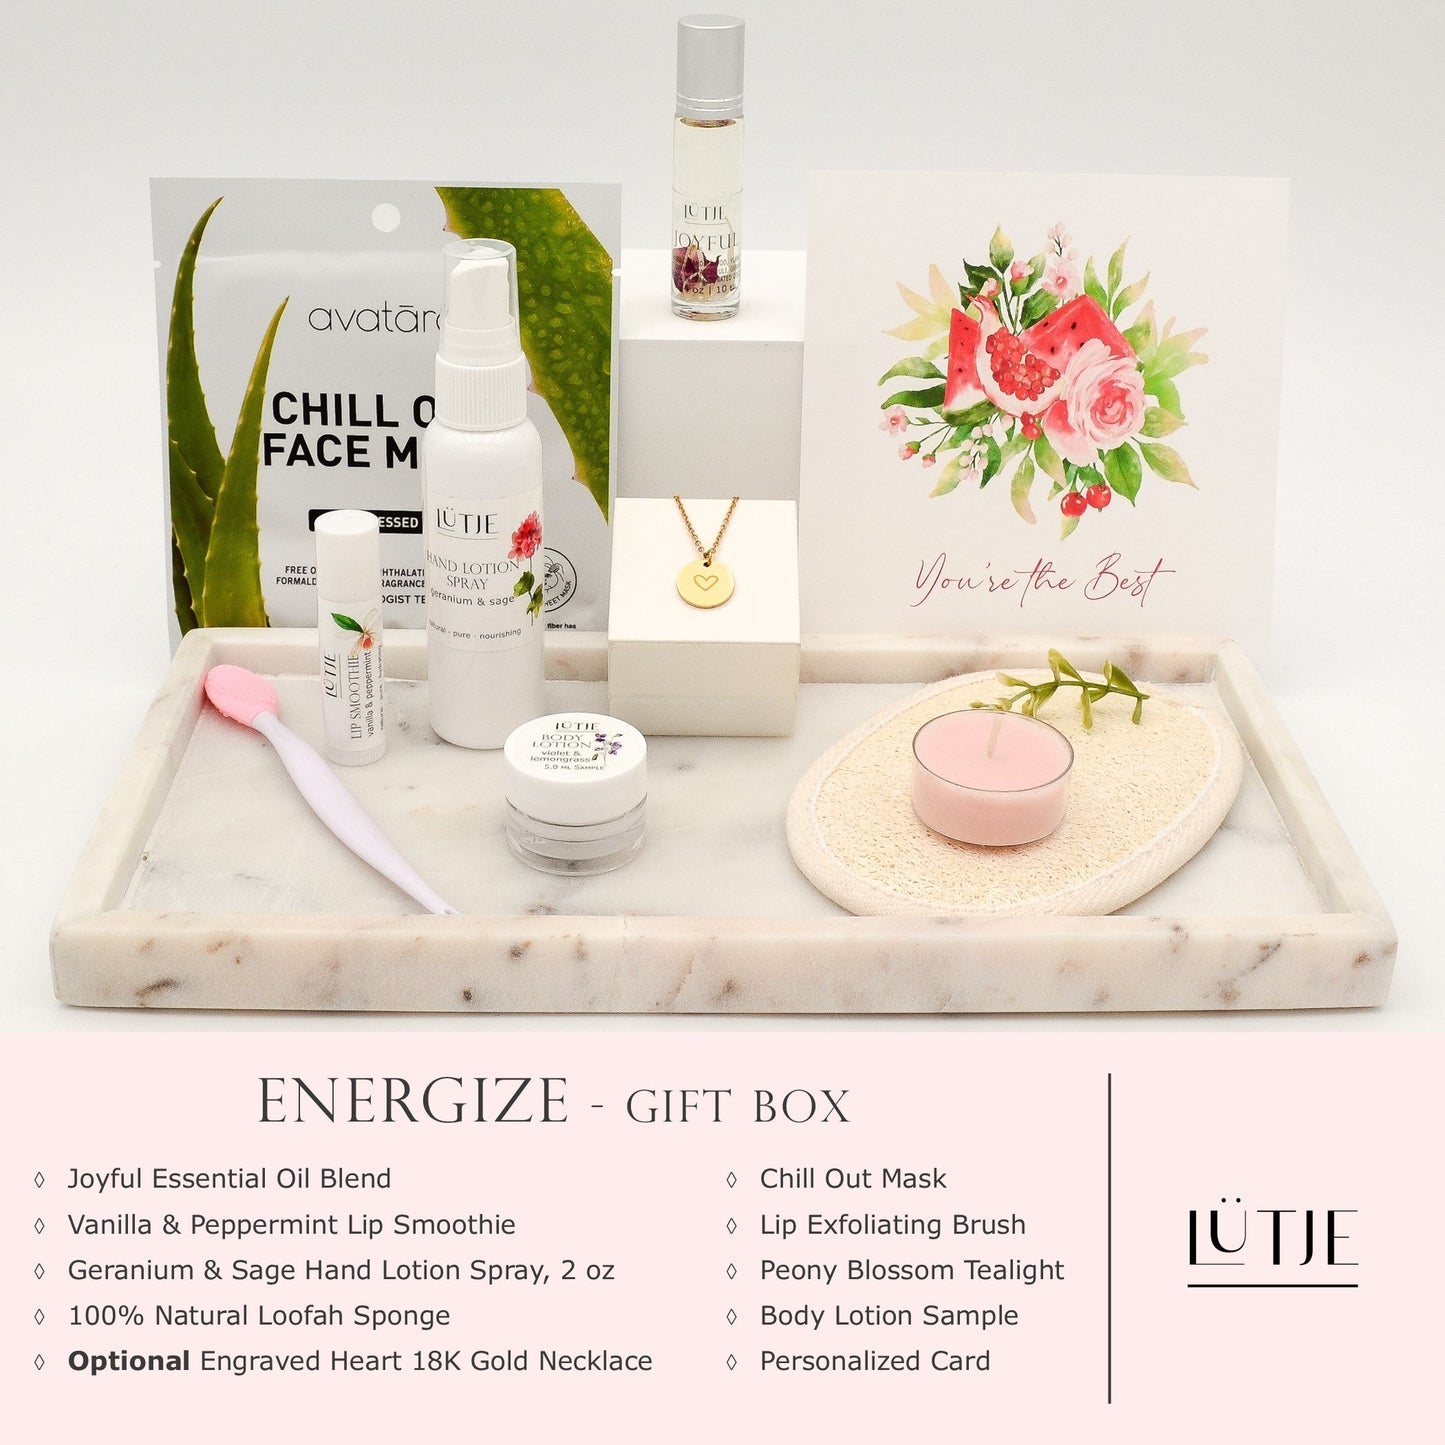 Energize Gift Box for women, BFF, wife, daughter, sister, mom, or grandma, includes Geranium & Sage hand lotion spray, essential oil, lip balm, hydrating face mask, other bath, spa and self-care items, and 18K gold-plated necklace with engraved heart.